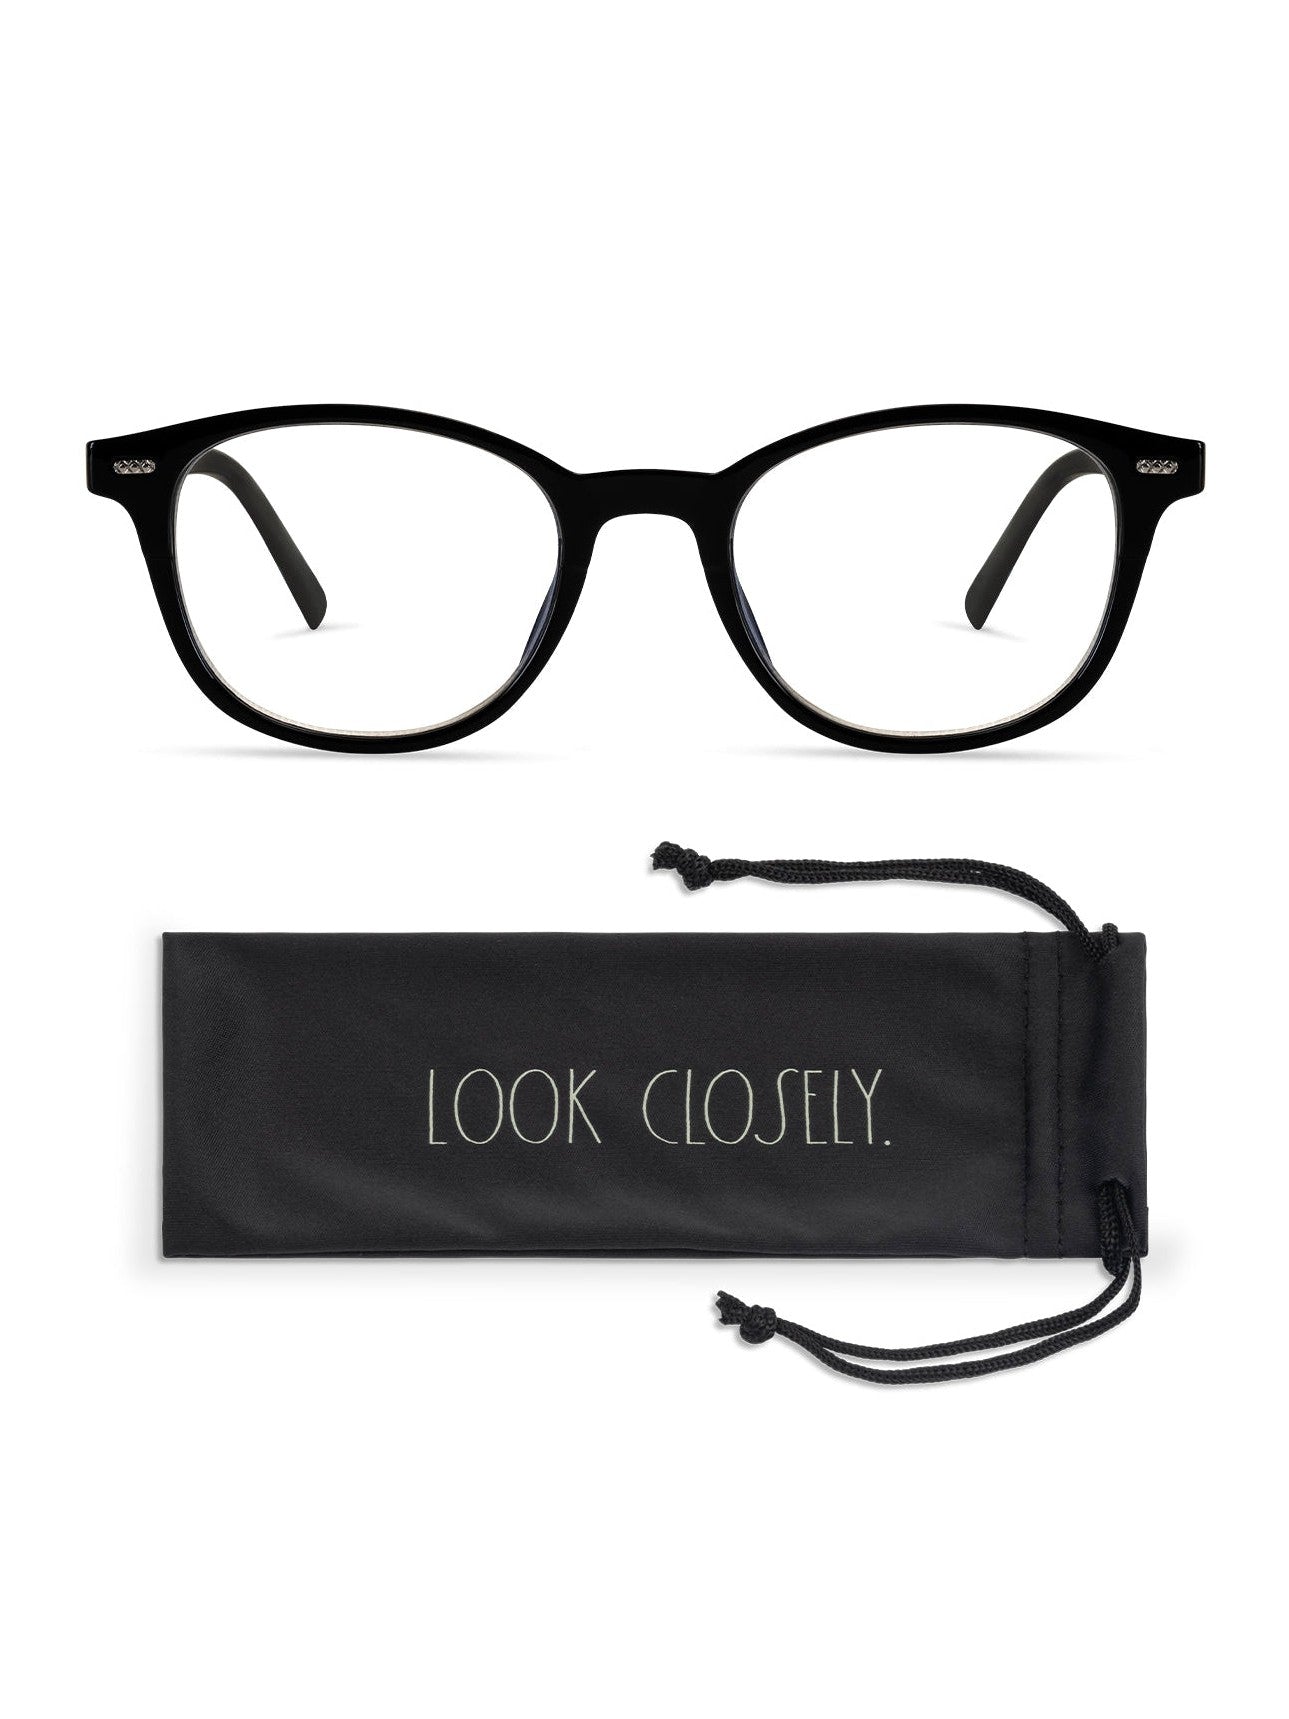 ELIZA Blue Light Blocking Reading Glasses with "LOOK CLOSELY" Signature - Rae Dunn Wear